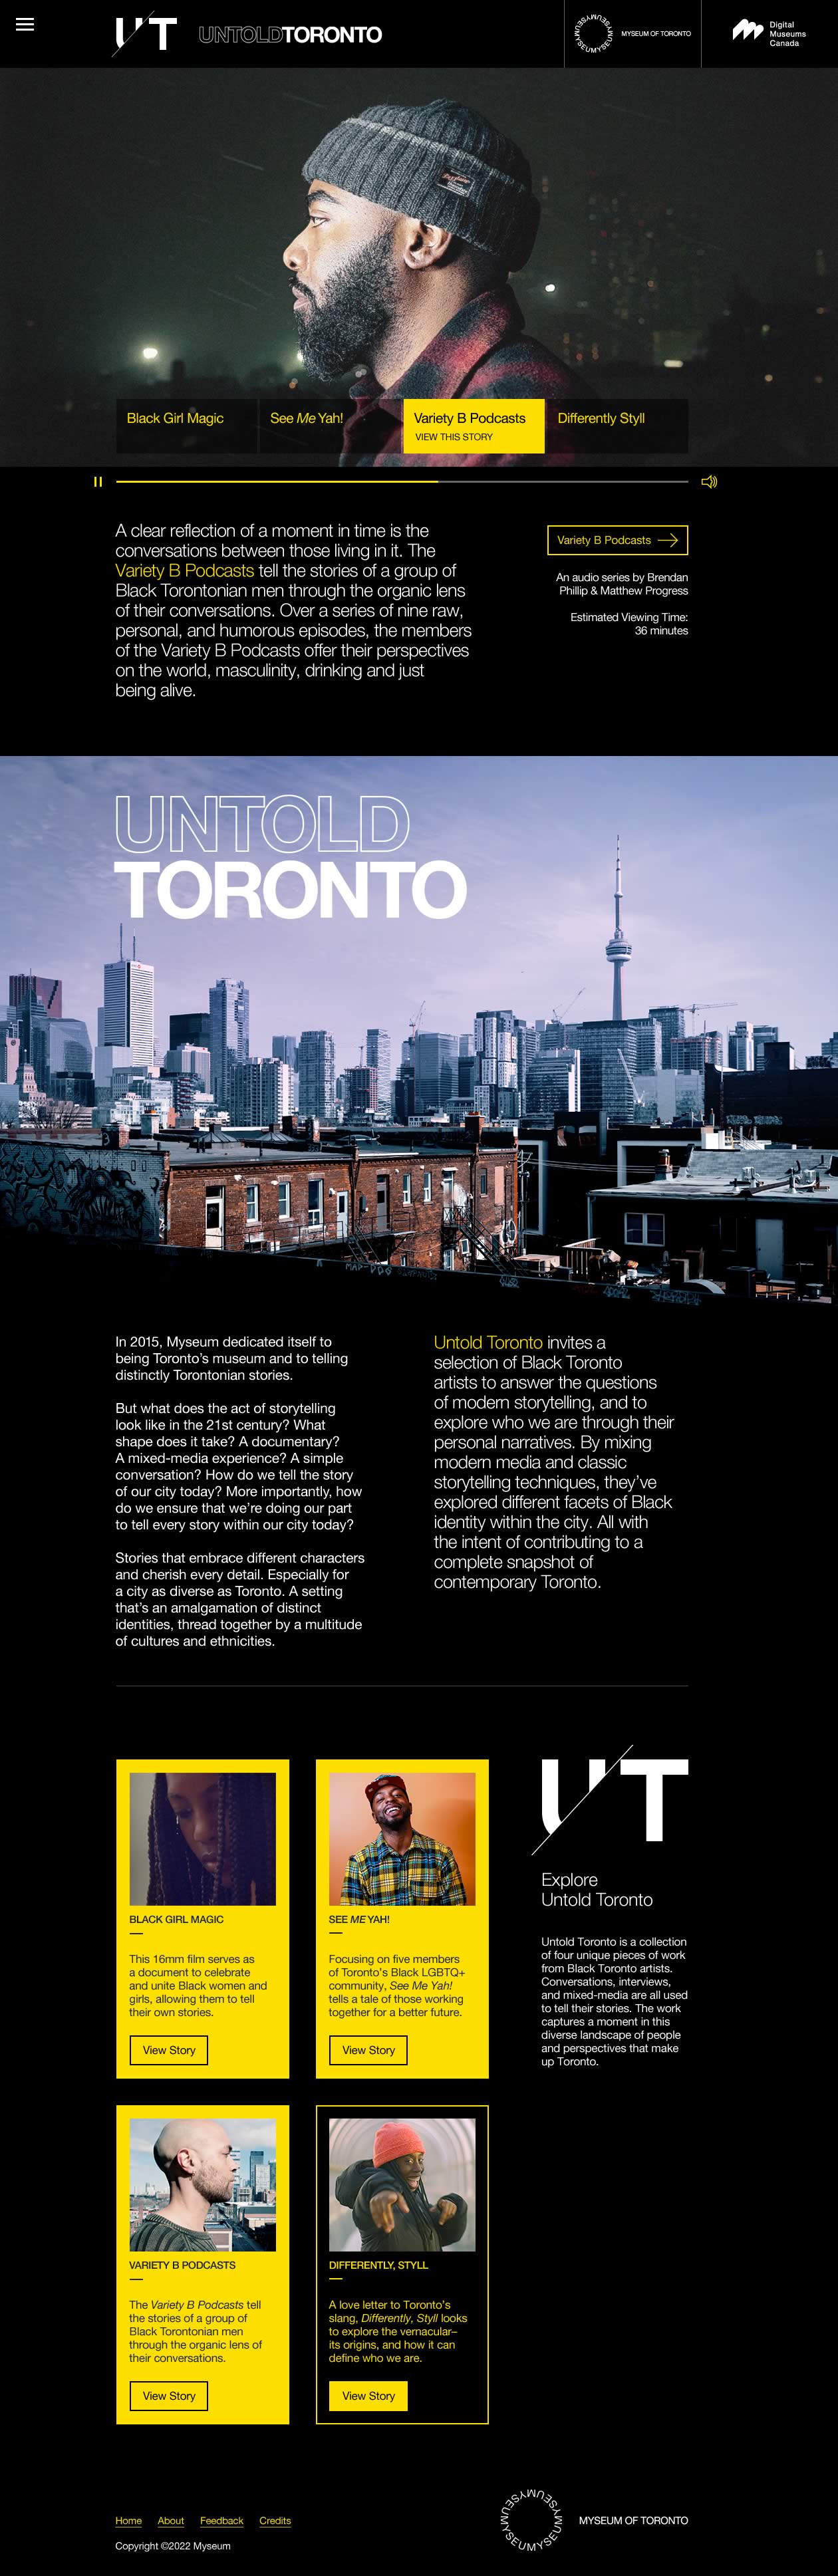 Capture of the full homepage from the Untold Toronto microsite